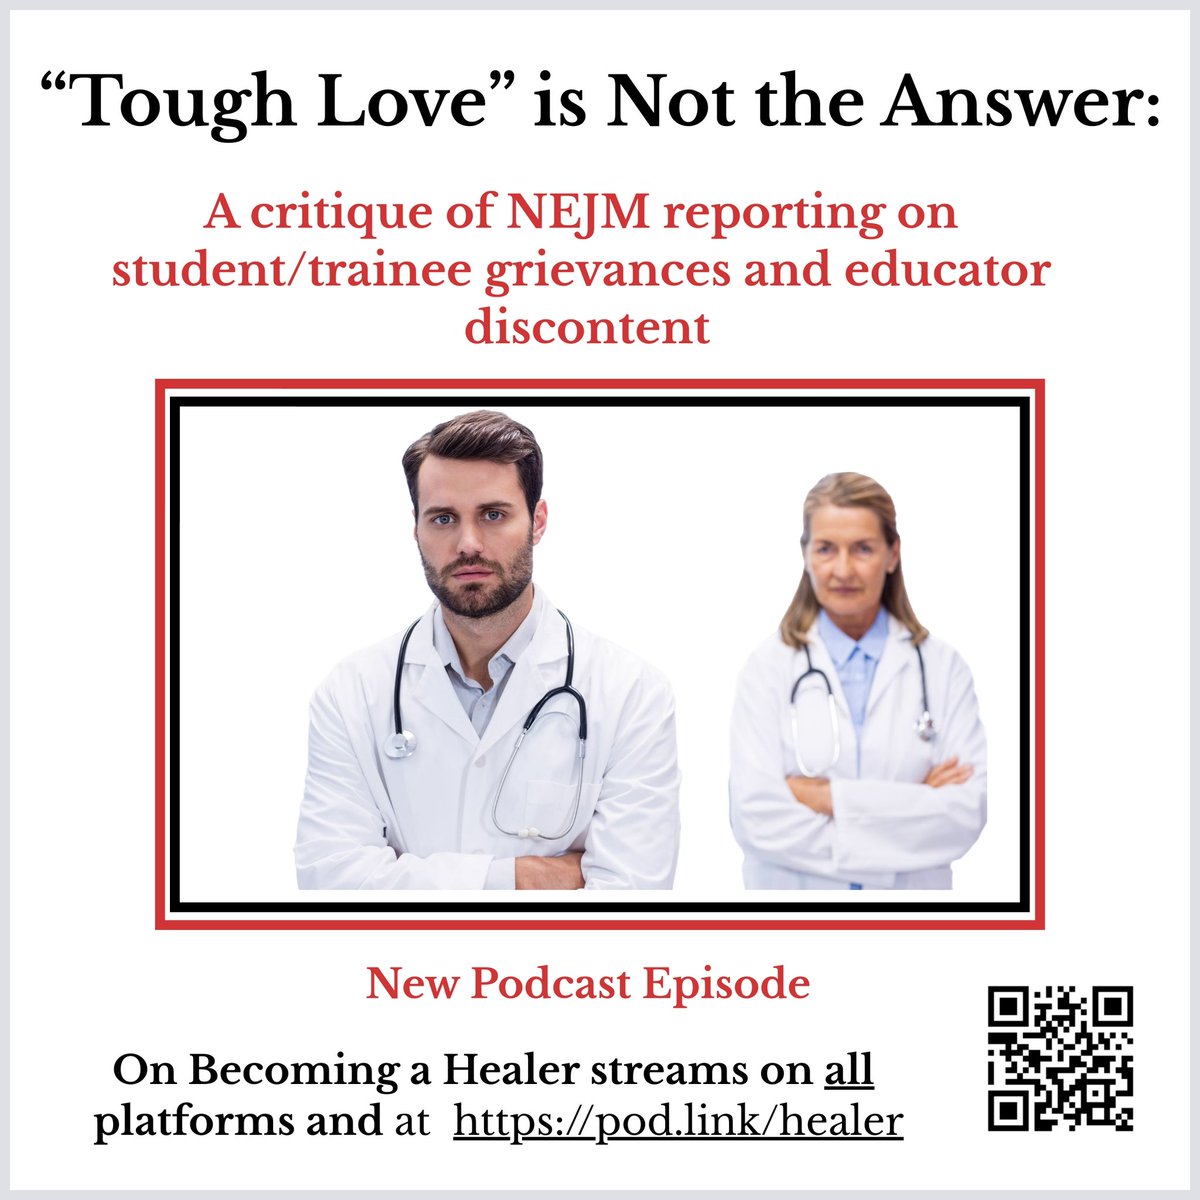 A recent @NEJM podcast “Tough Love” suggests that medical educators are bullied by demanding students & residents who wield the power of social media Our latest “On Becoming a Healer” podcast finds missed opportunities for dialogue, and many descriptions of medical students as